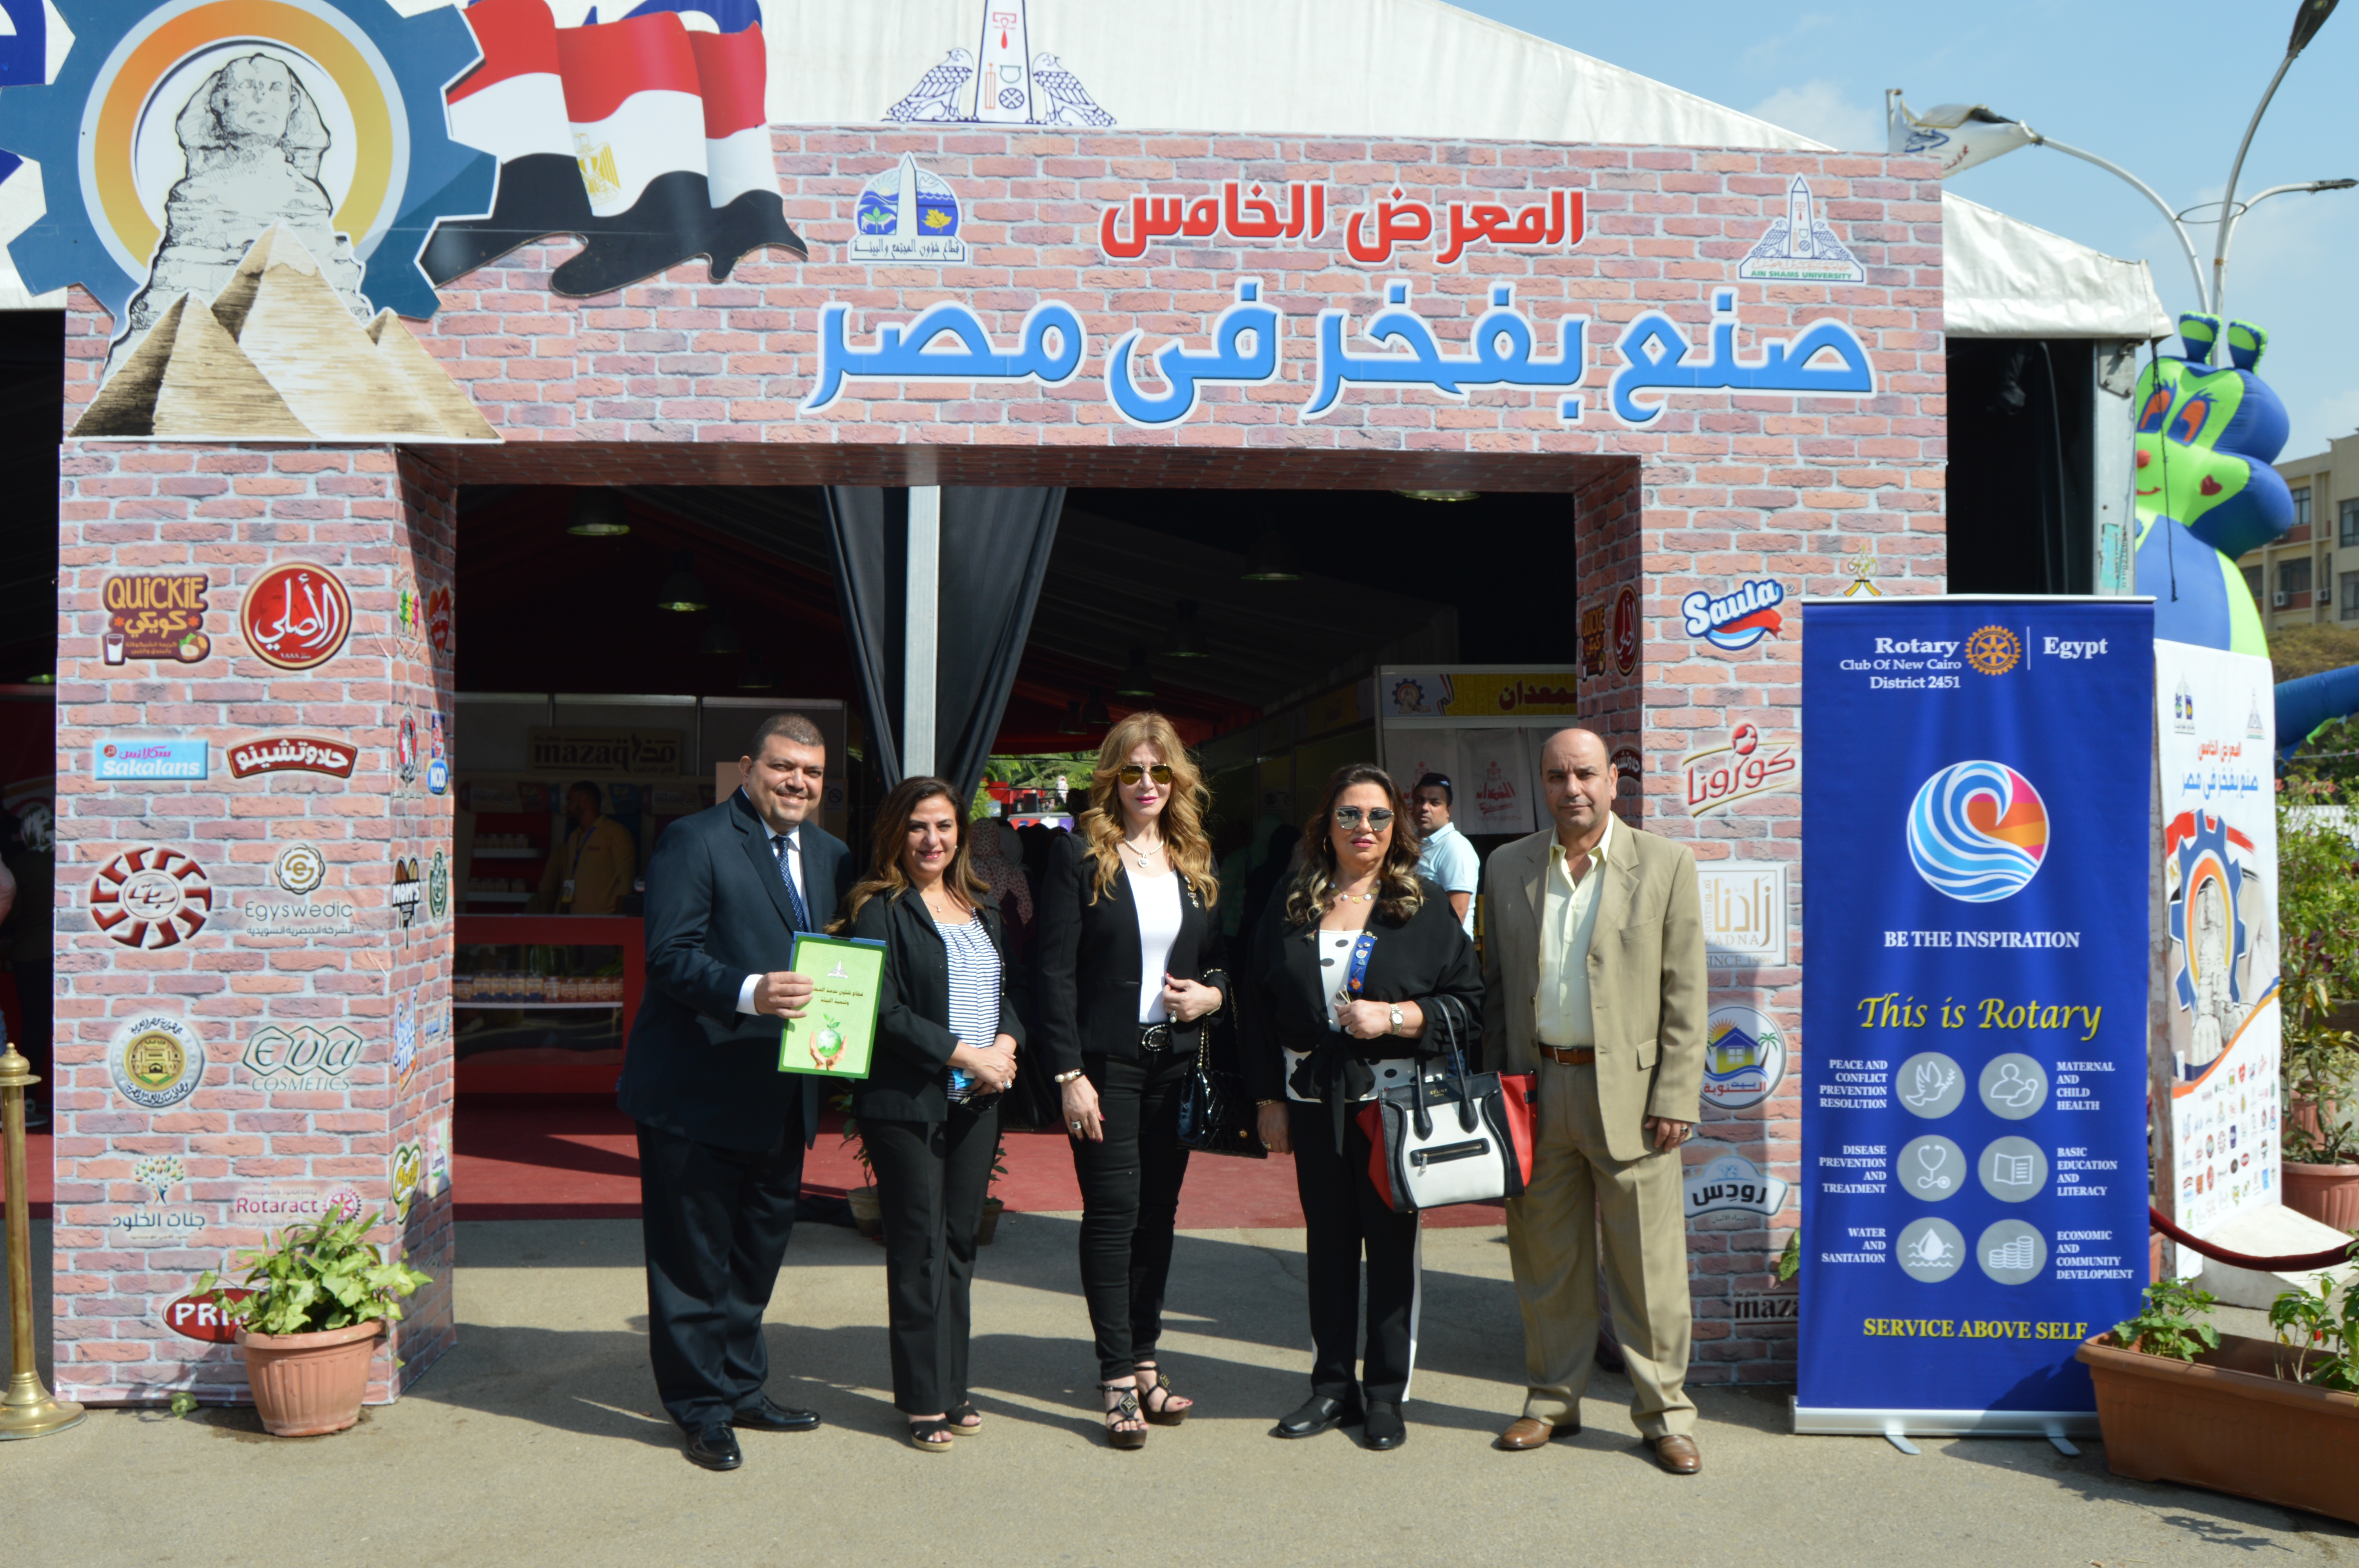 An inspection tour of the new Cairo Rotary delegation at "Made proudly in Egypt" exhibition.